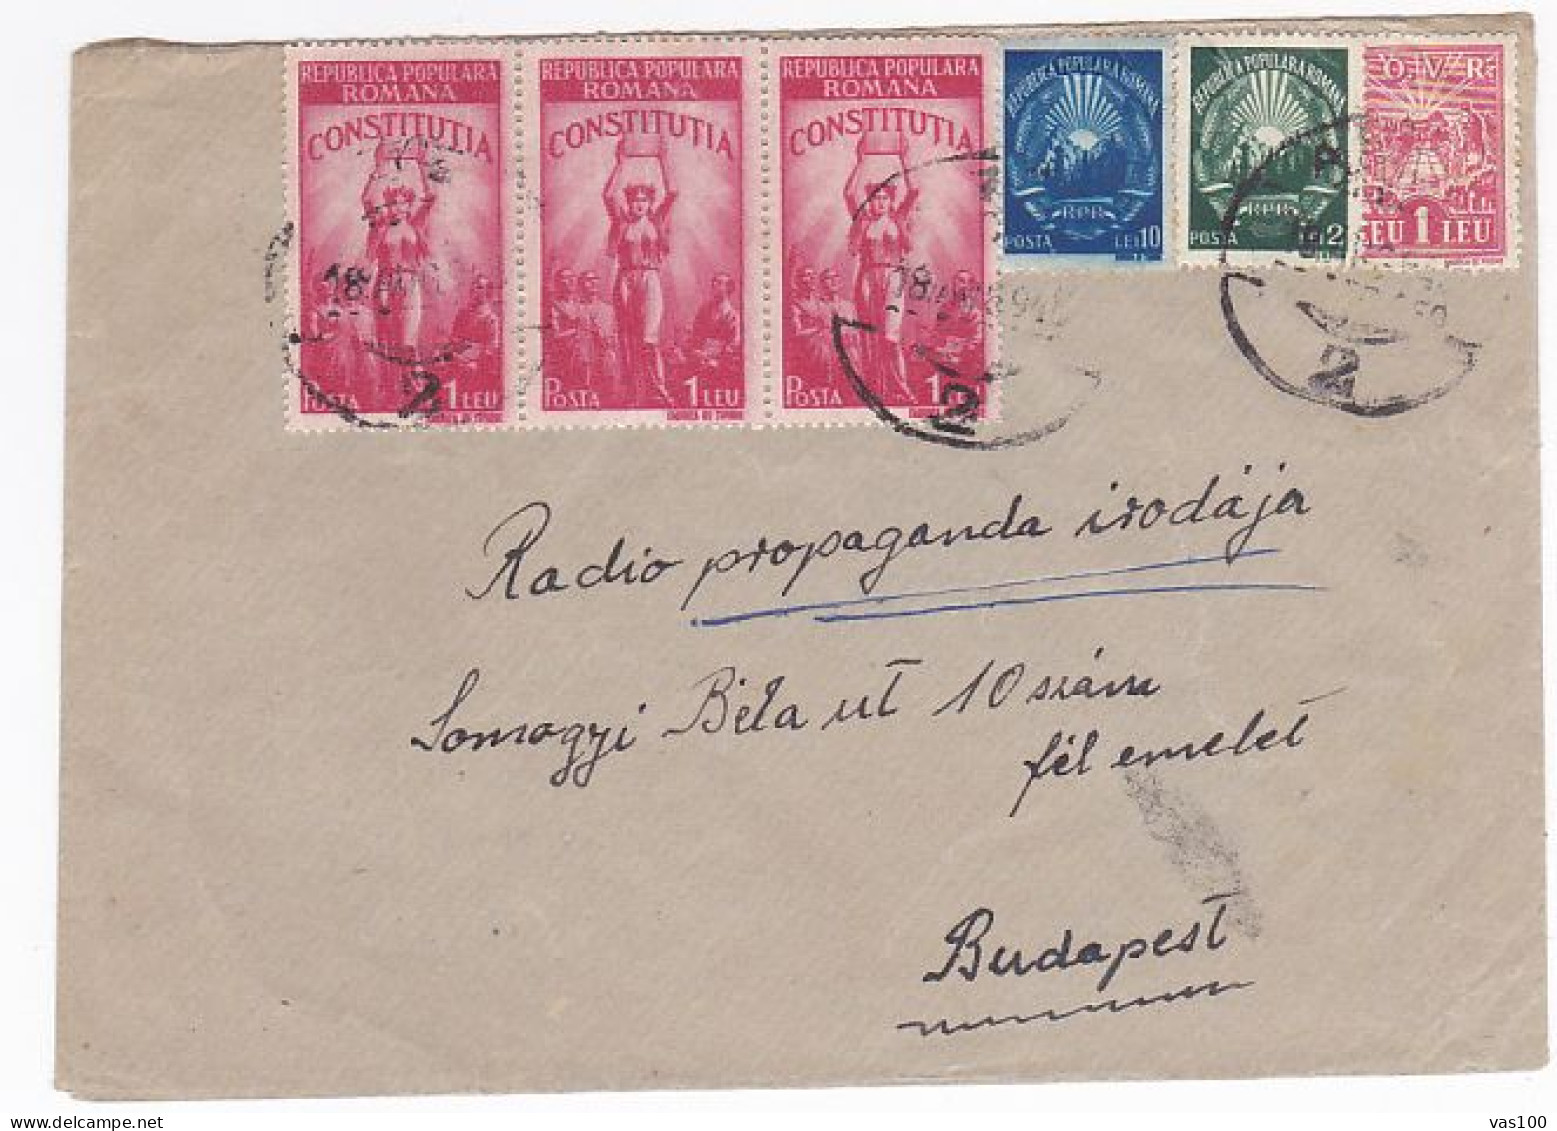 REVENUE STAMP, CONSTITUTION, REPUBLIC COAT OF ARMS, STAMPS ON COVER, 1948, ROMANIA - Fiscales